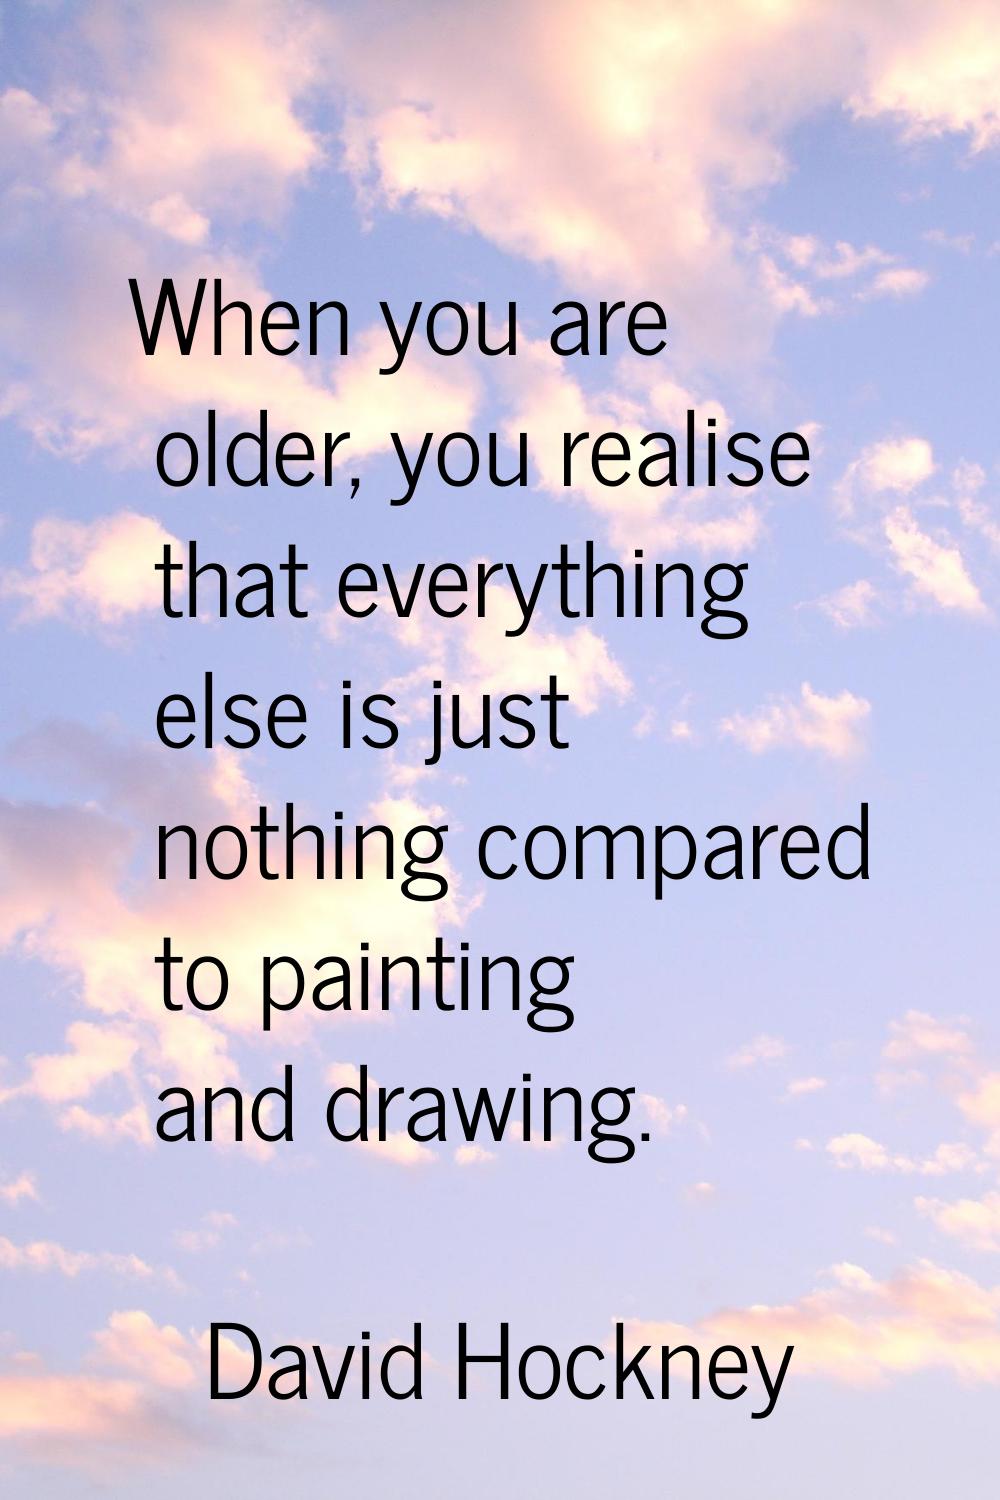 When you are older, you realise that everything else is just nothing compared to painting and drawi